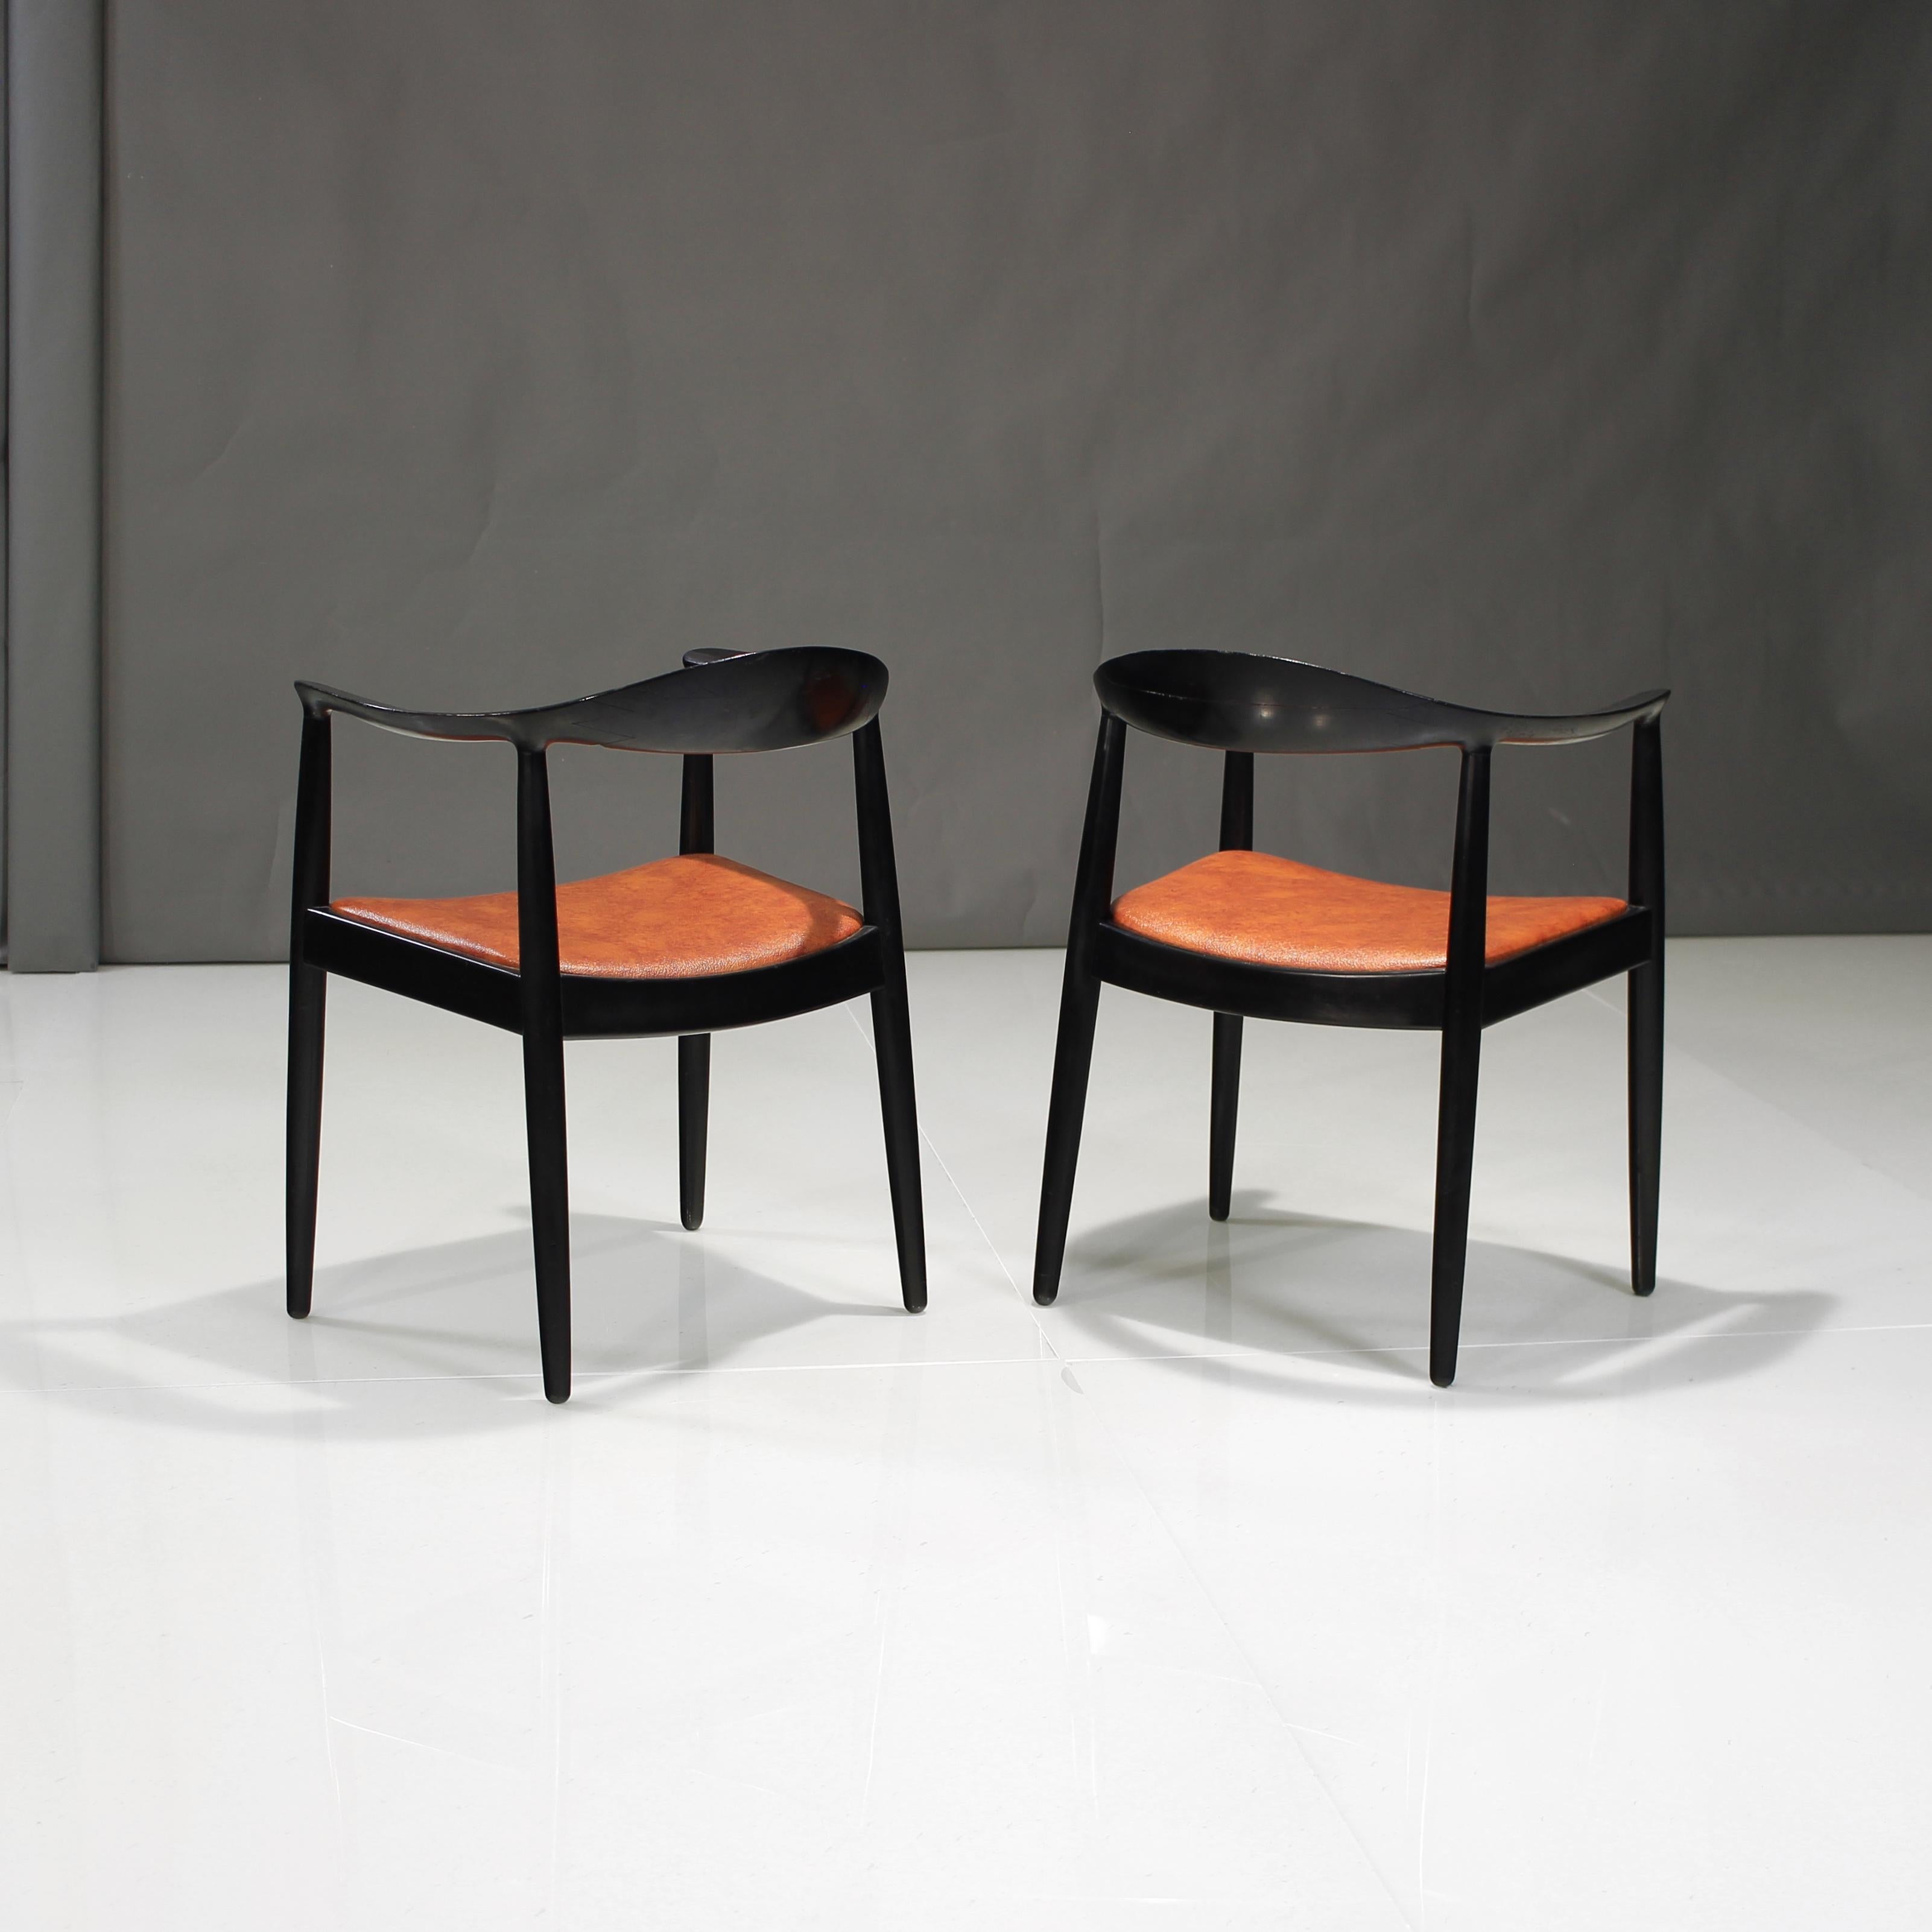 Lacquered Pair of Mid-Century Ebonized Oak Round Chairs after Hans Wegner For Sale